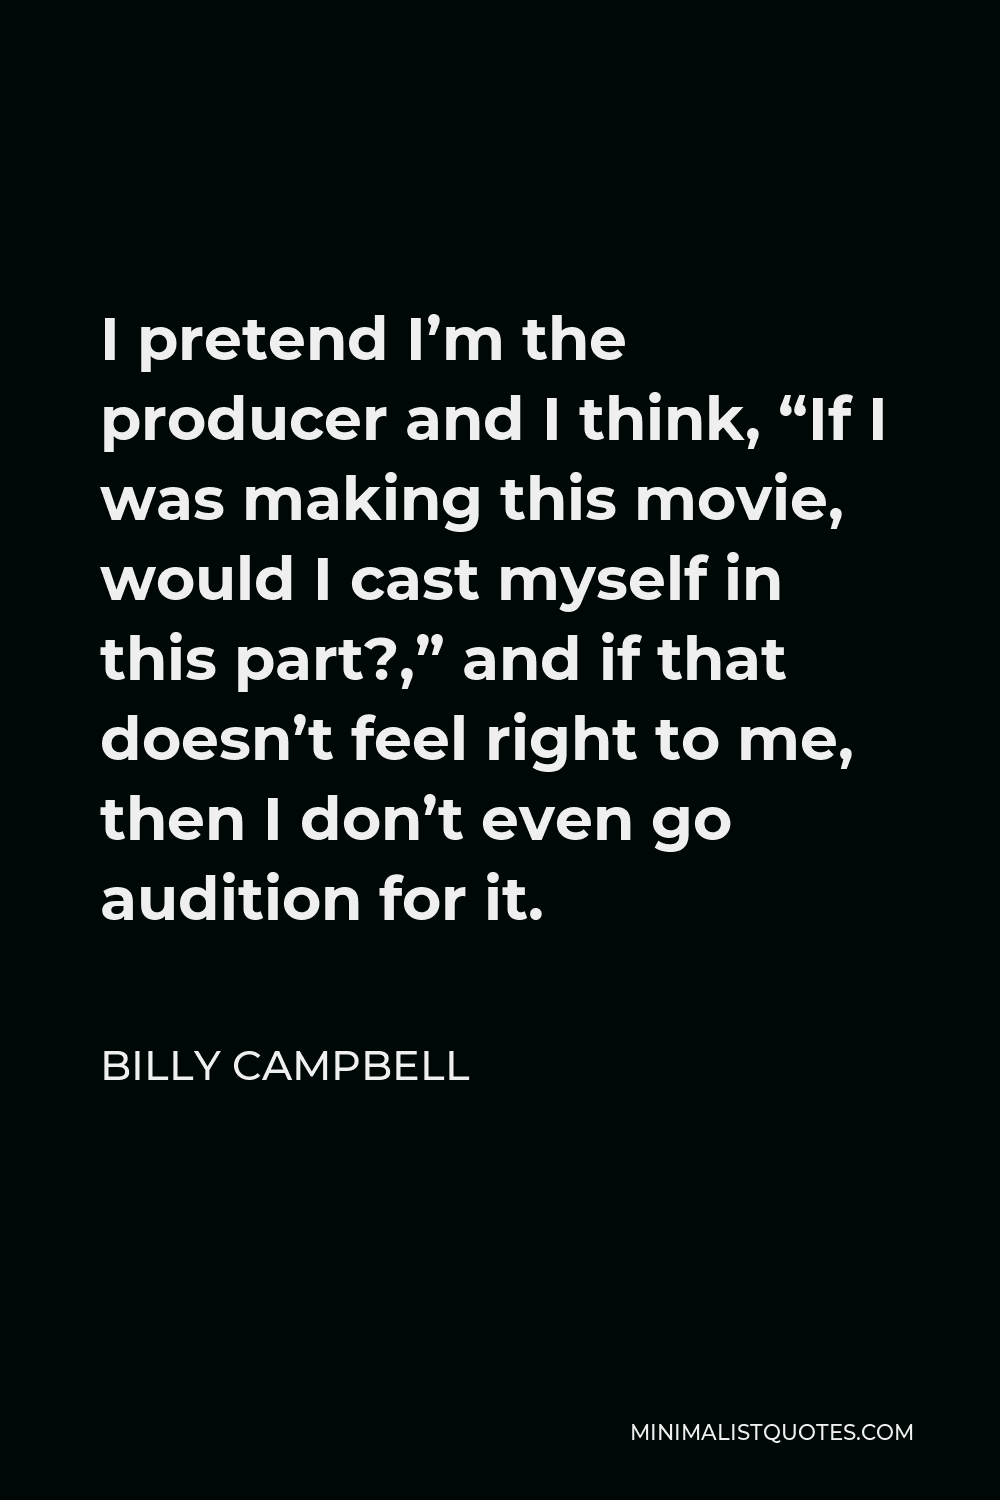 Billy Campbell Quote - I pretend I’m the producer and I think, “If I was making this movie, would I cast myself in this part?,” and if that doesn’t feel right to me, then I don’t even go audition for it.